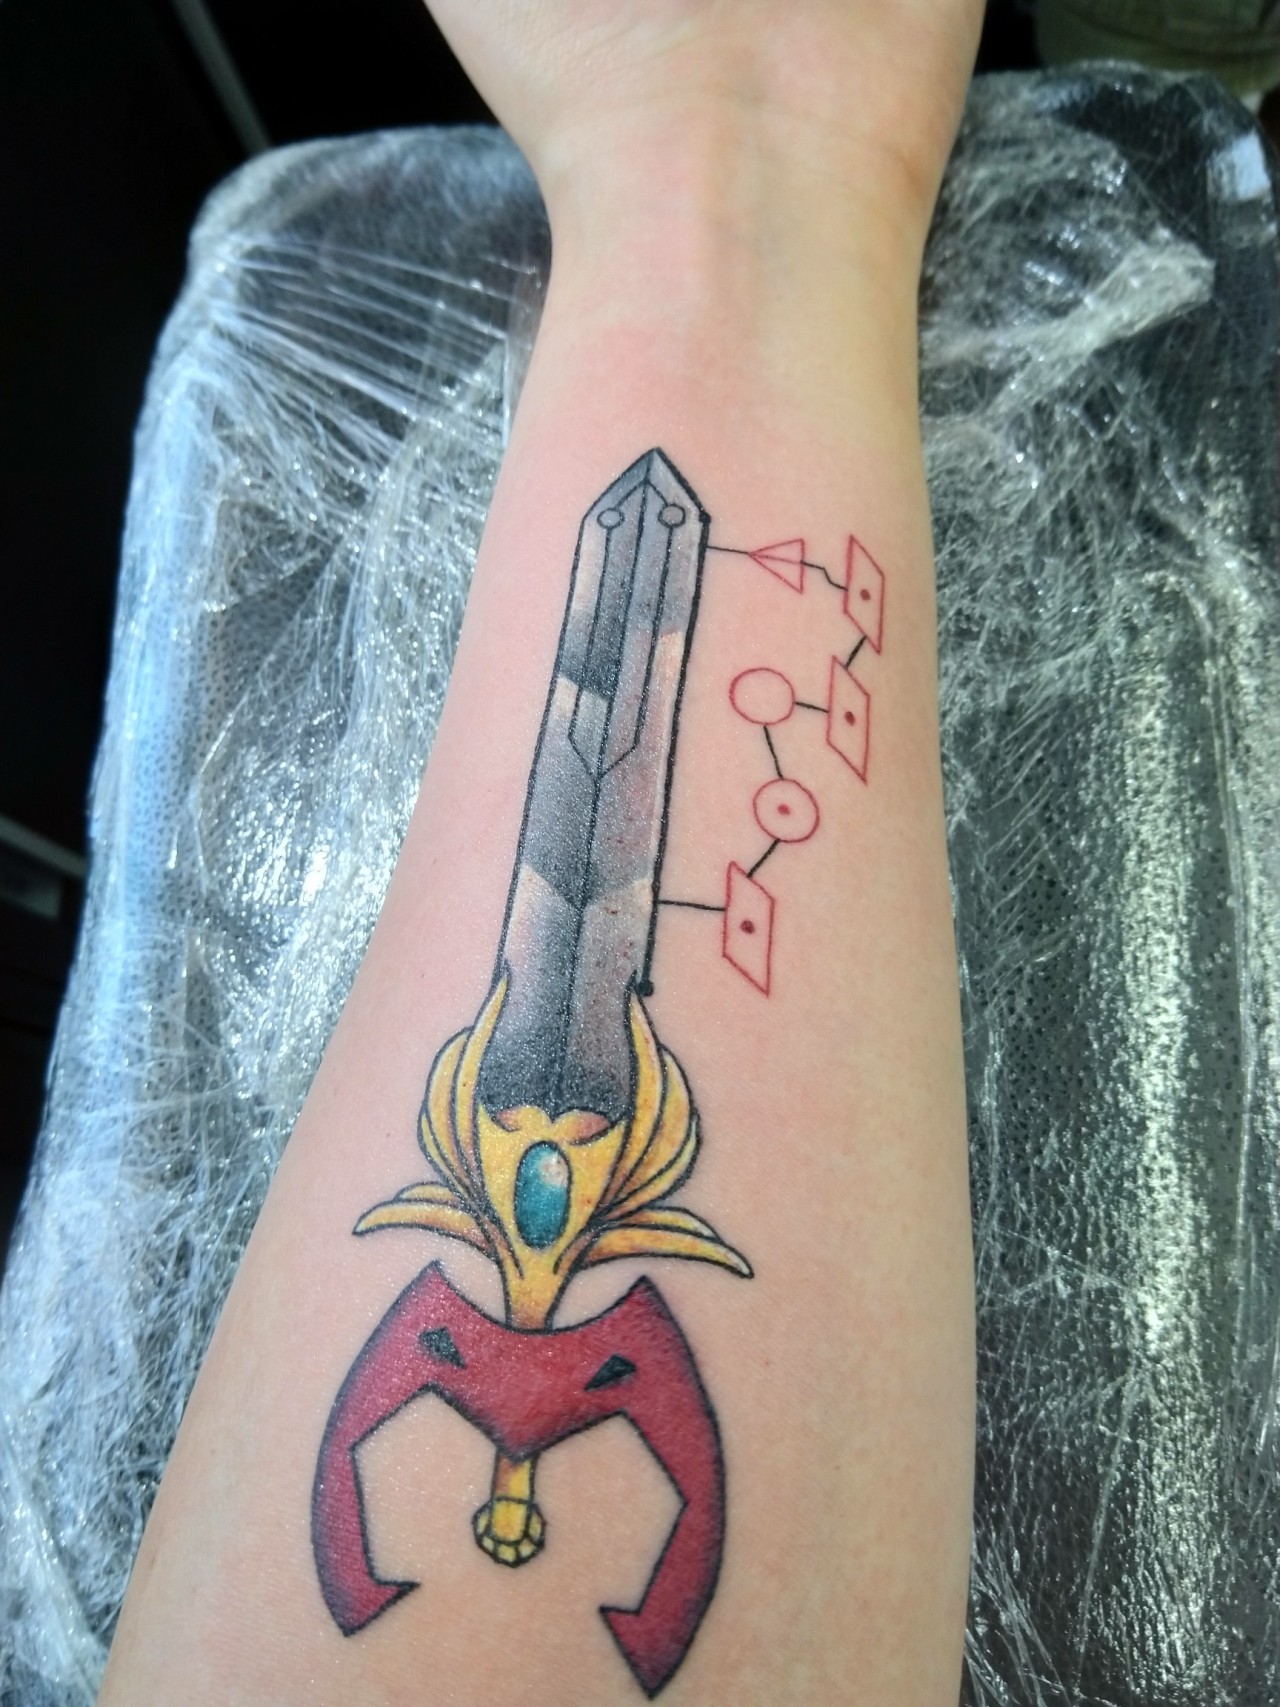 I got a SheRa tattoo I love rollerskating and I love Glimmers quote in  the episode of this title Bad things happen Thats life You can either  let it paralyze you or